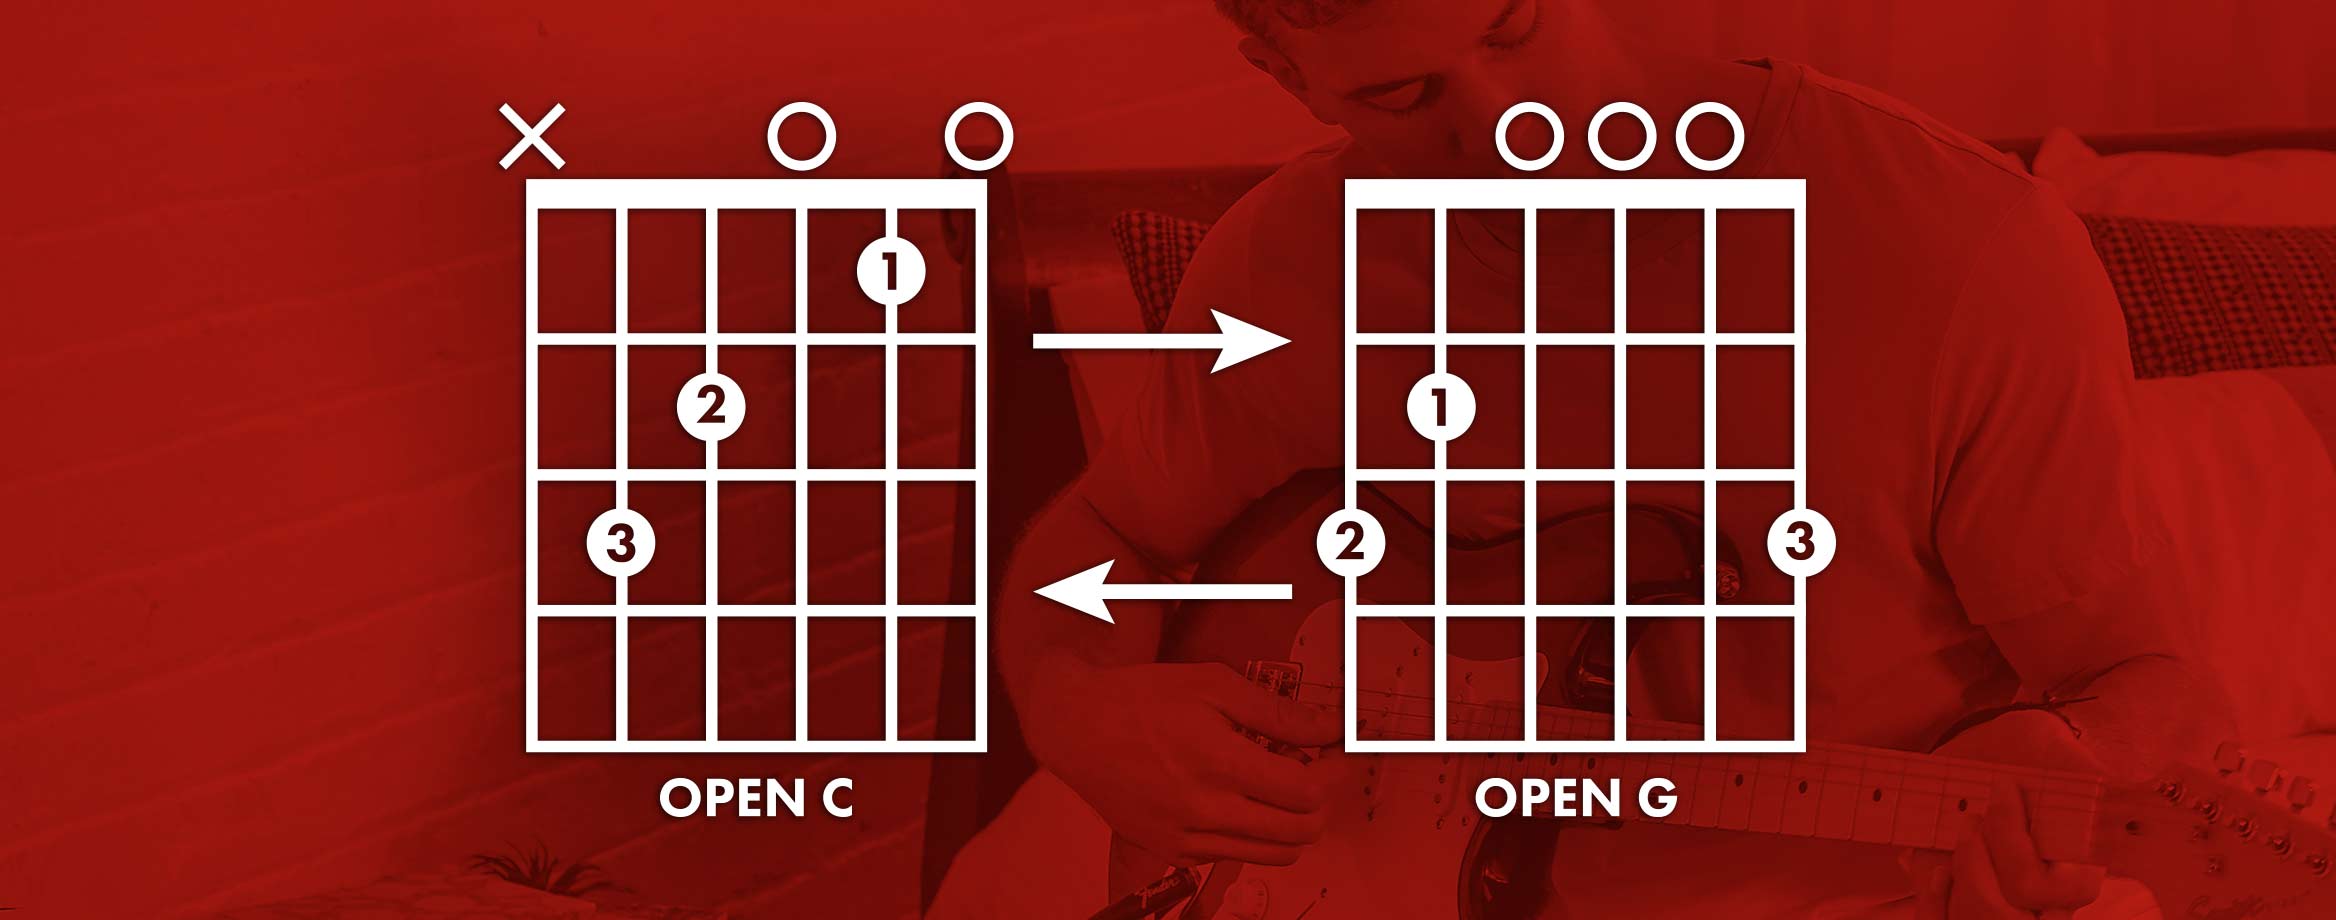 guitarlesson #acoustic #chords